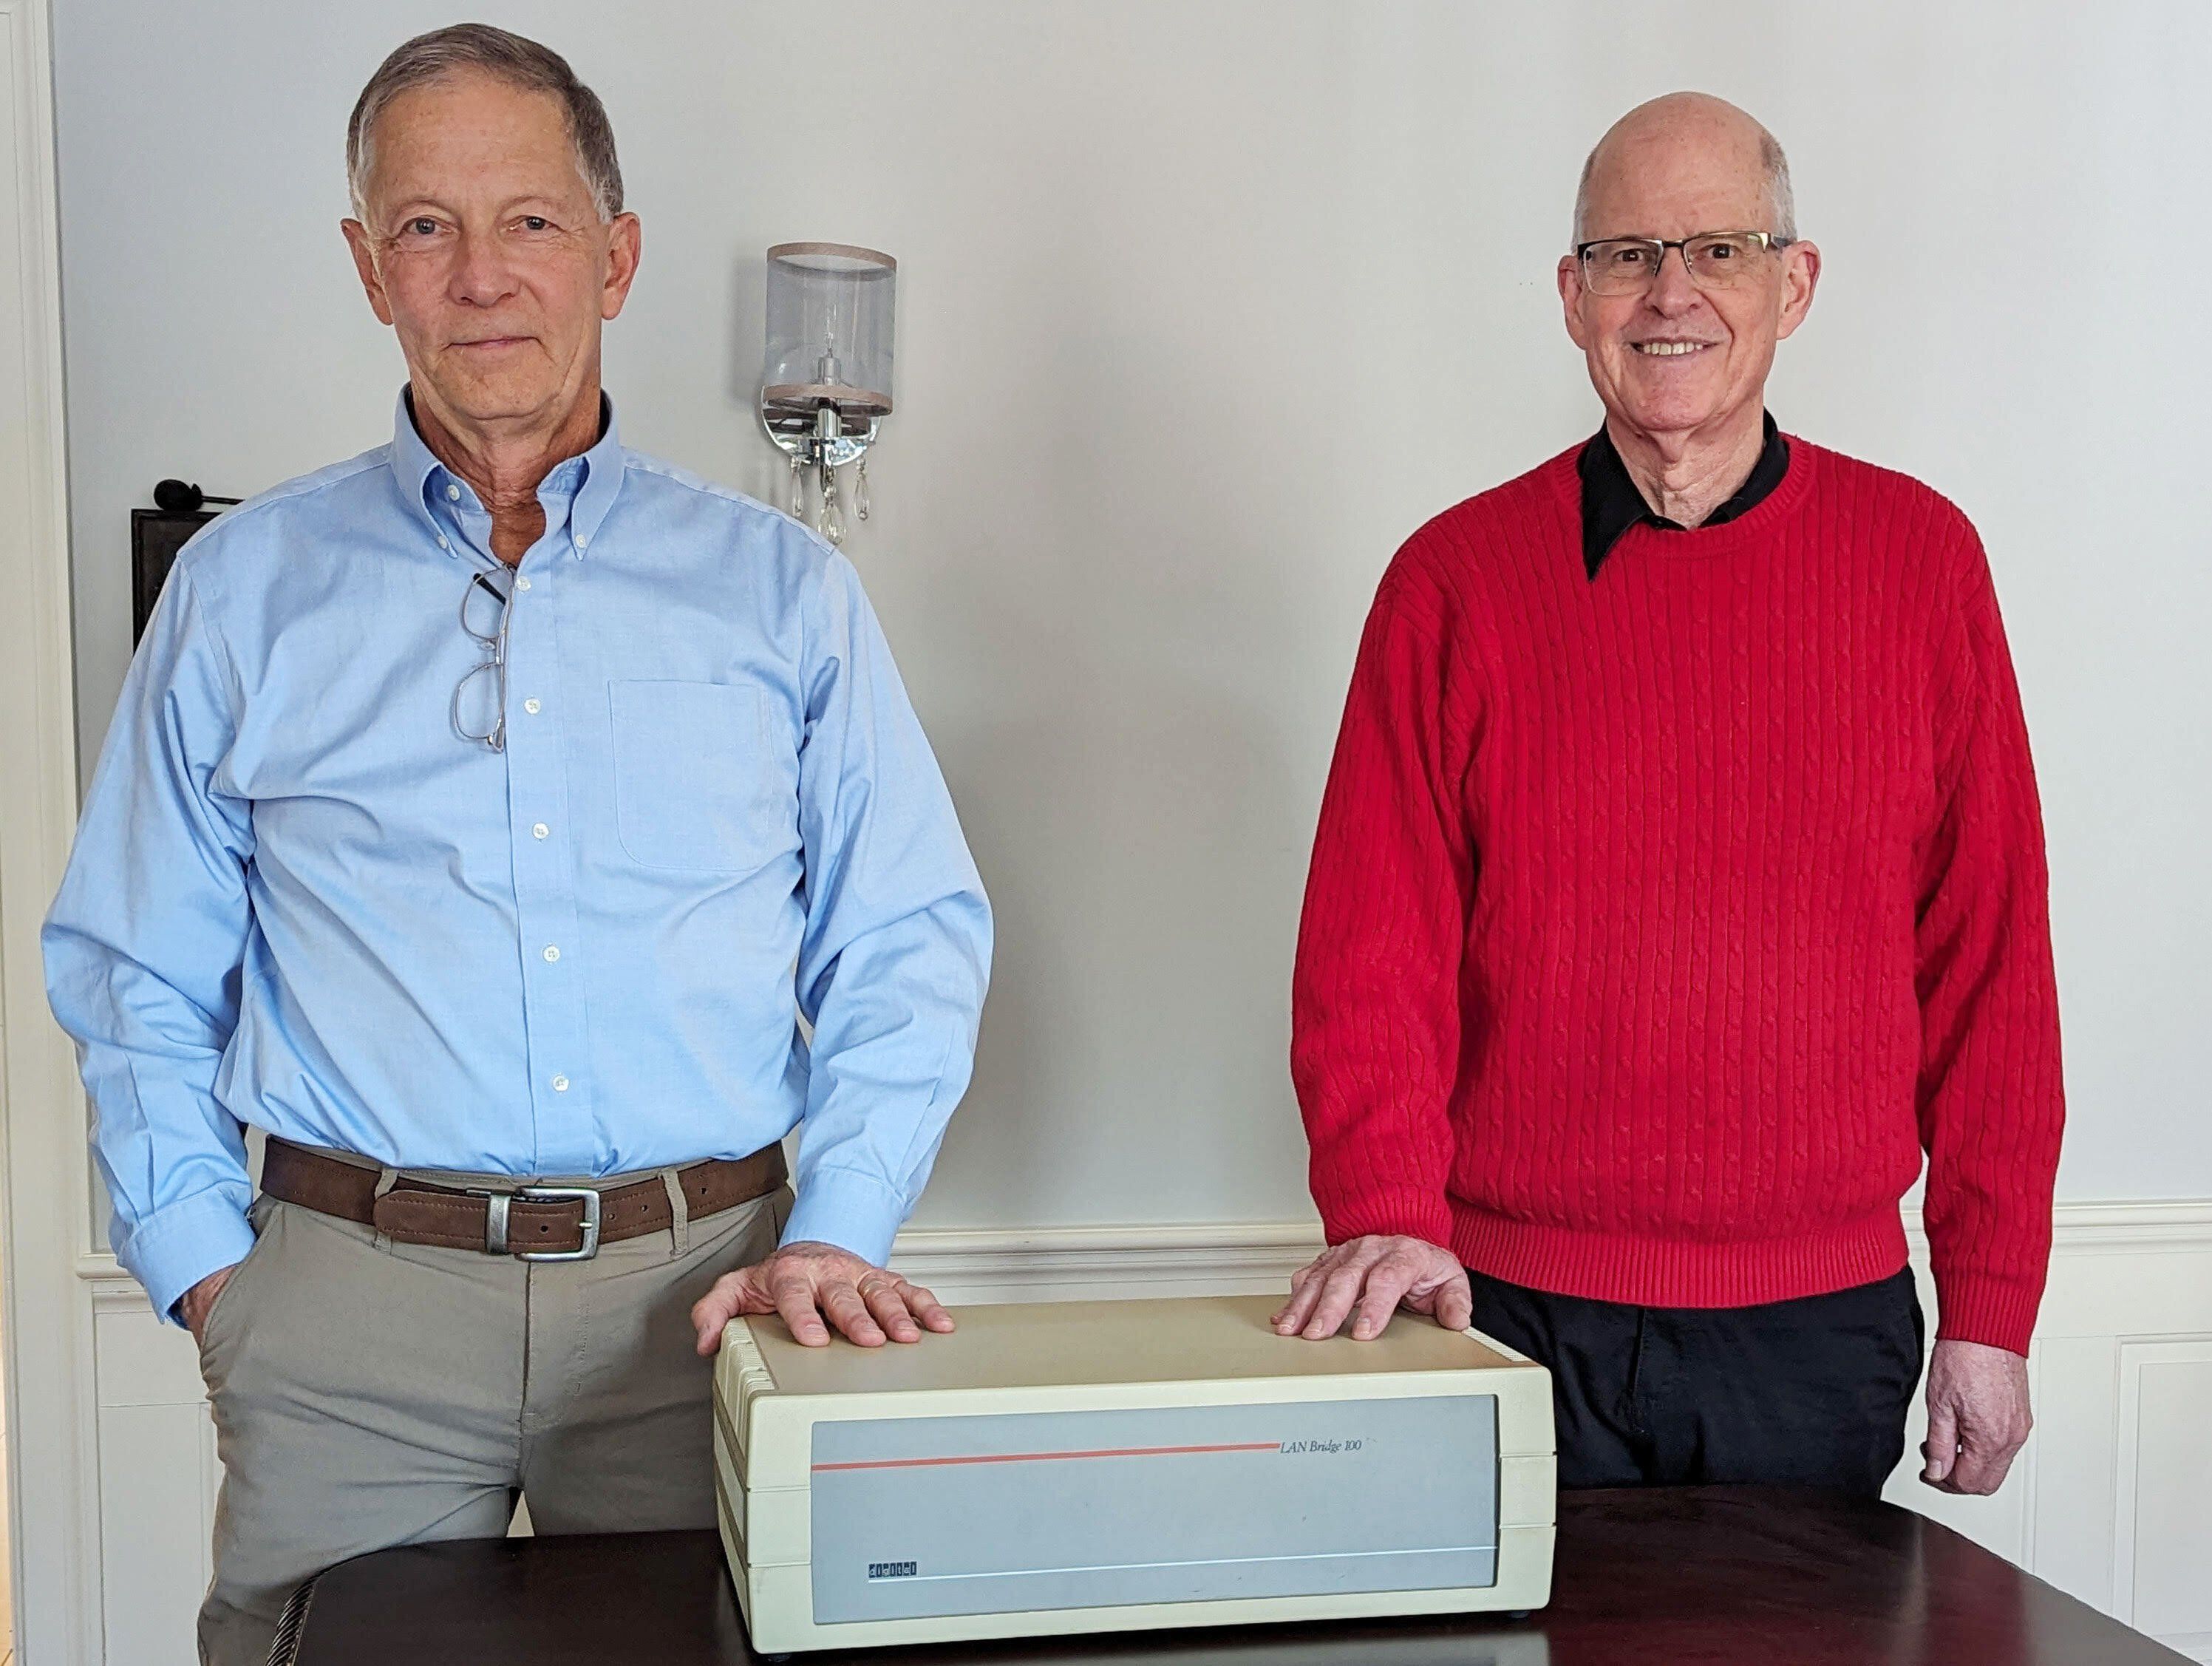 portrait of two men standing with their hands on a small beige and gray box while looking at the camera